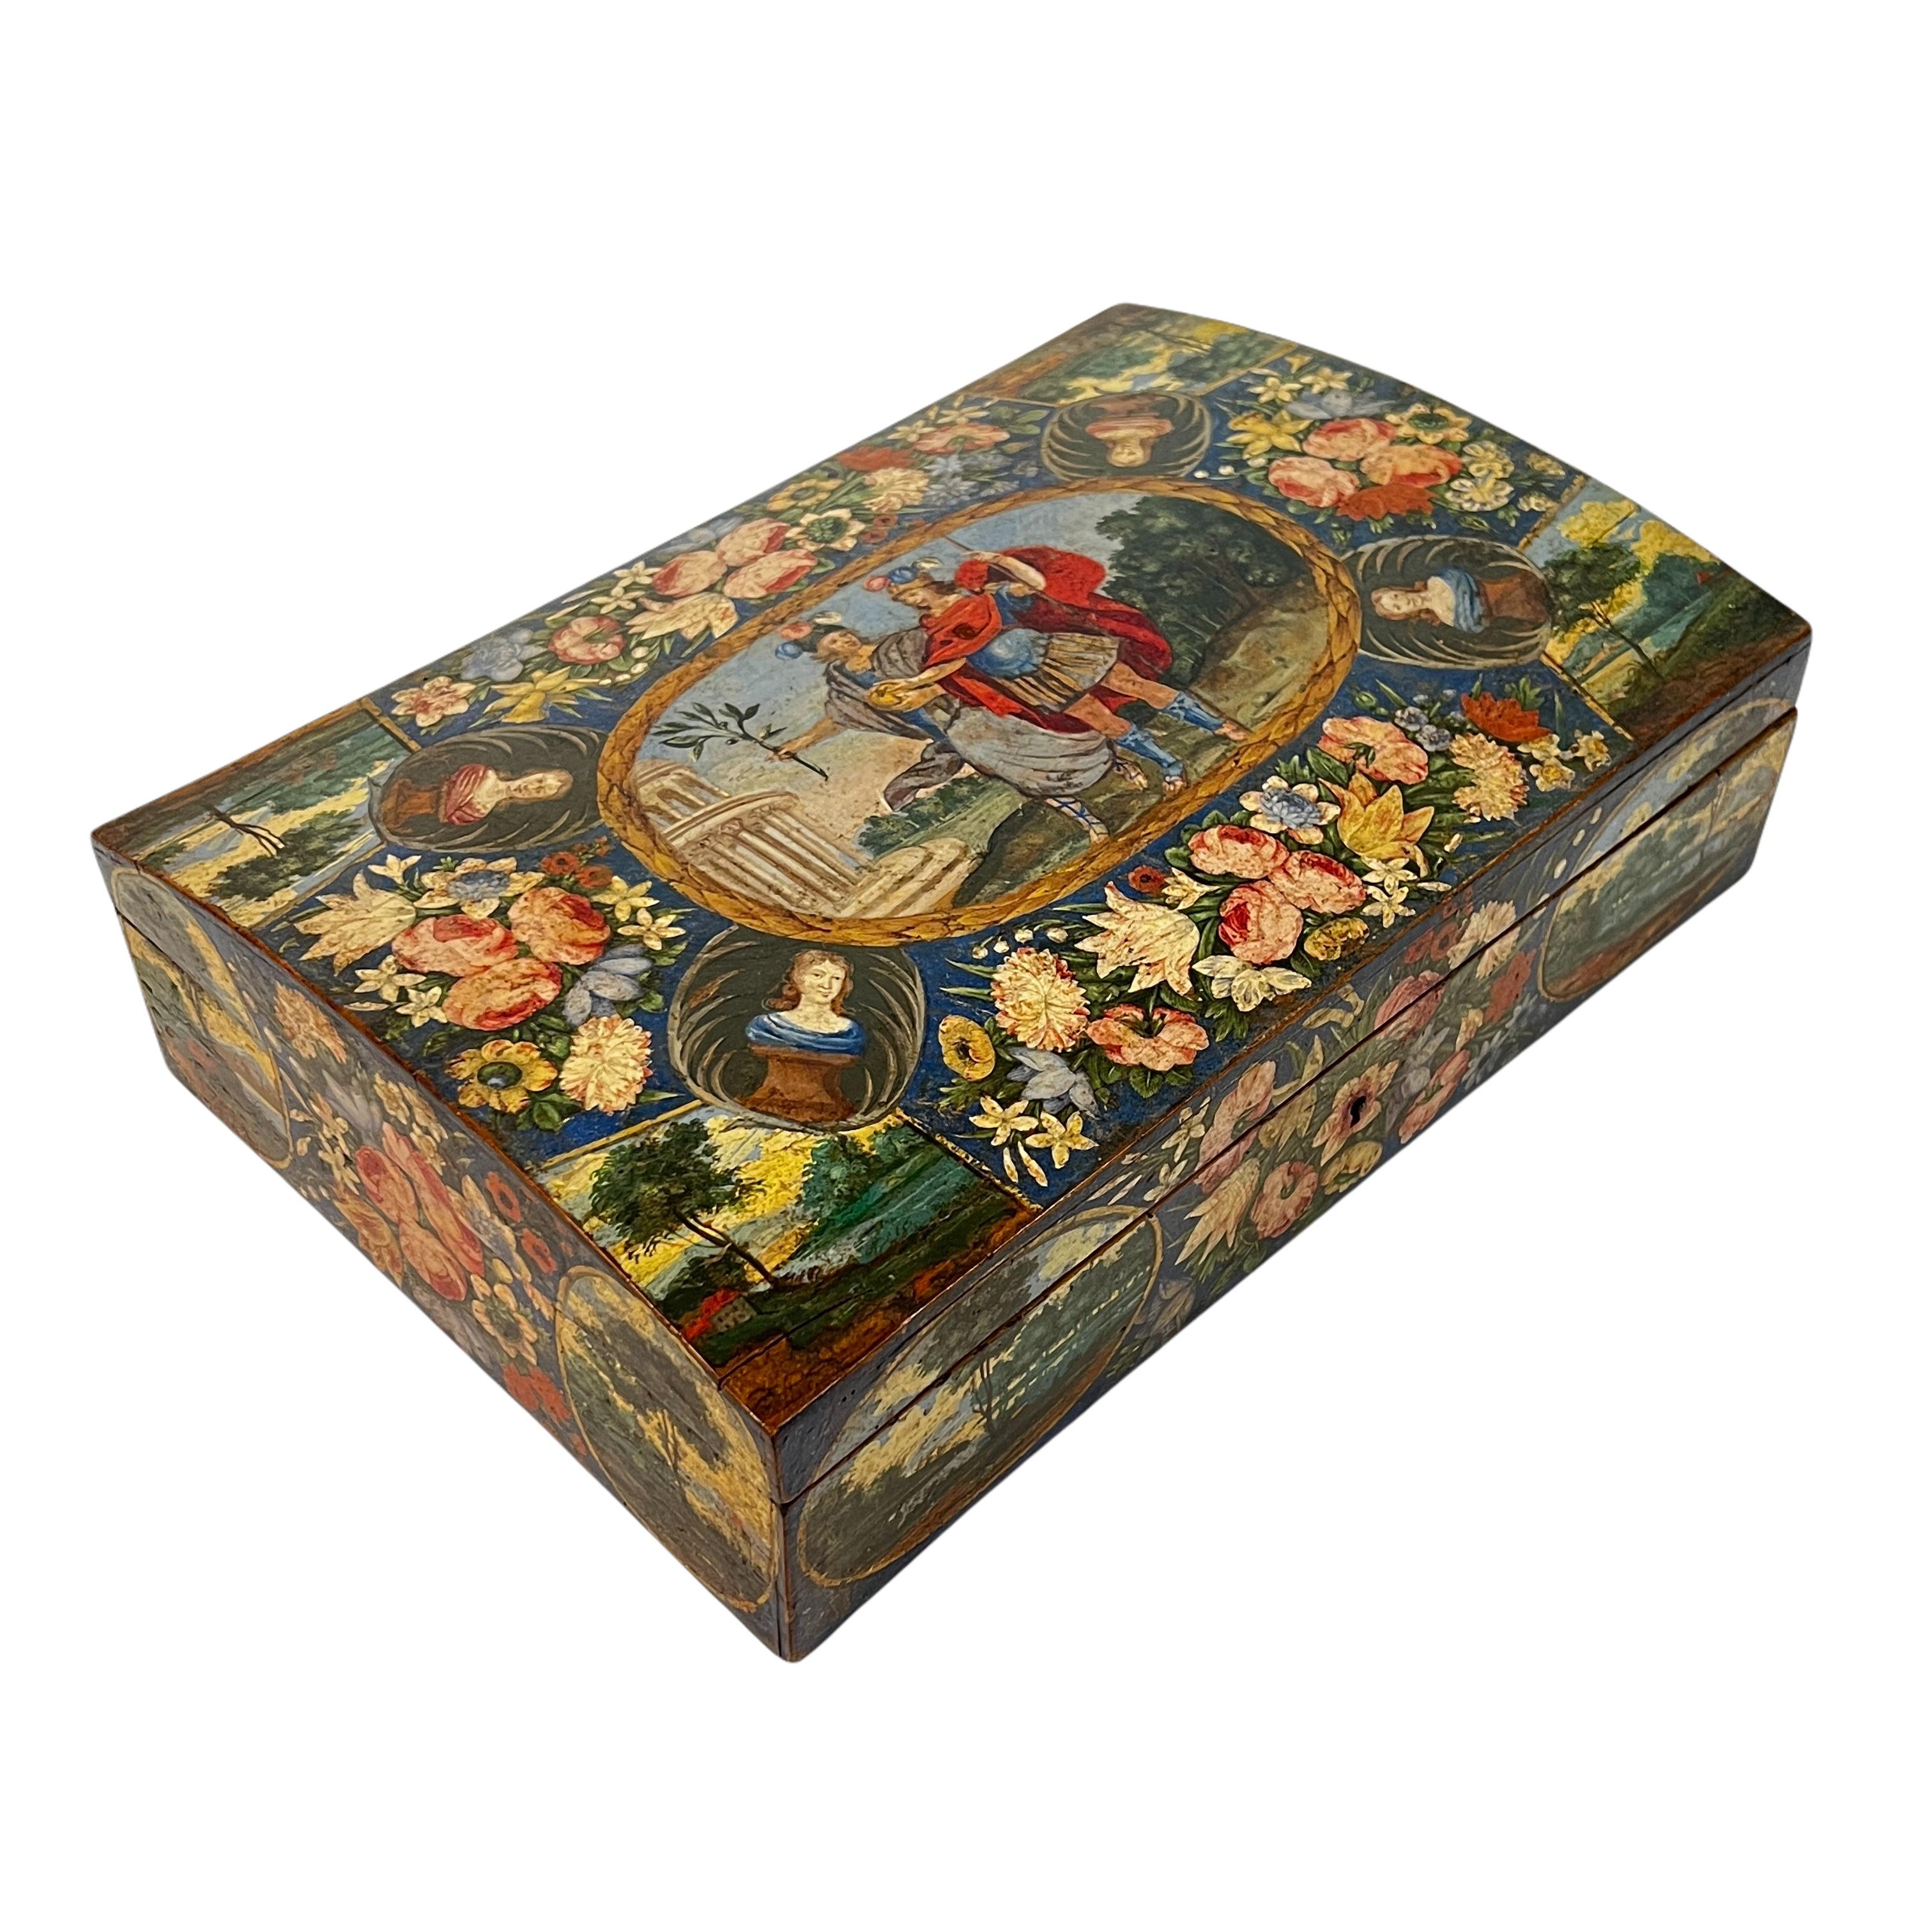 Our writing box measuring 14 by 9 1/2 by 4 inches dates from the late seventeenth century and is likely of Dutch or French origin. It features hand-painted flowers and landscapes on each side, and figures on the domed lid walking side-by-side in an